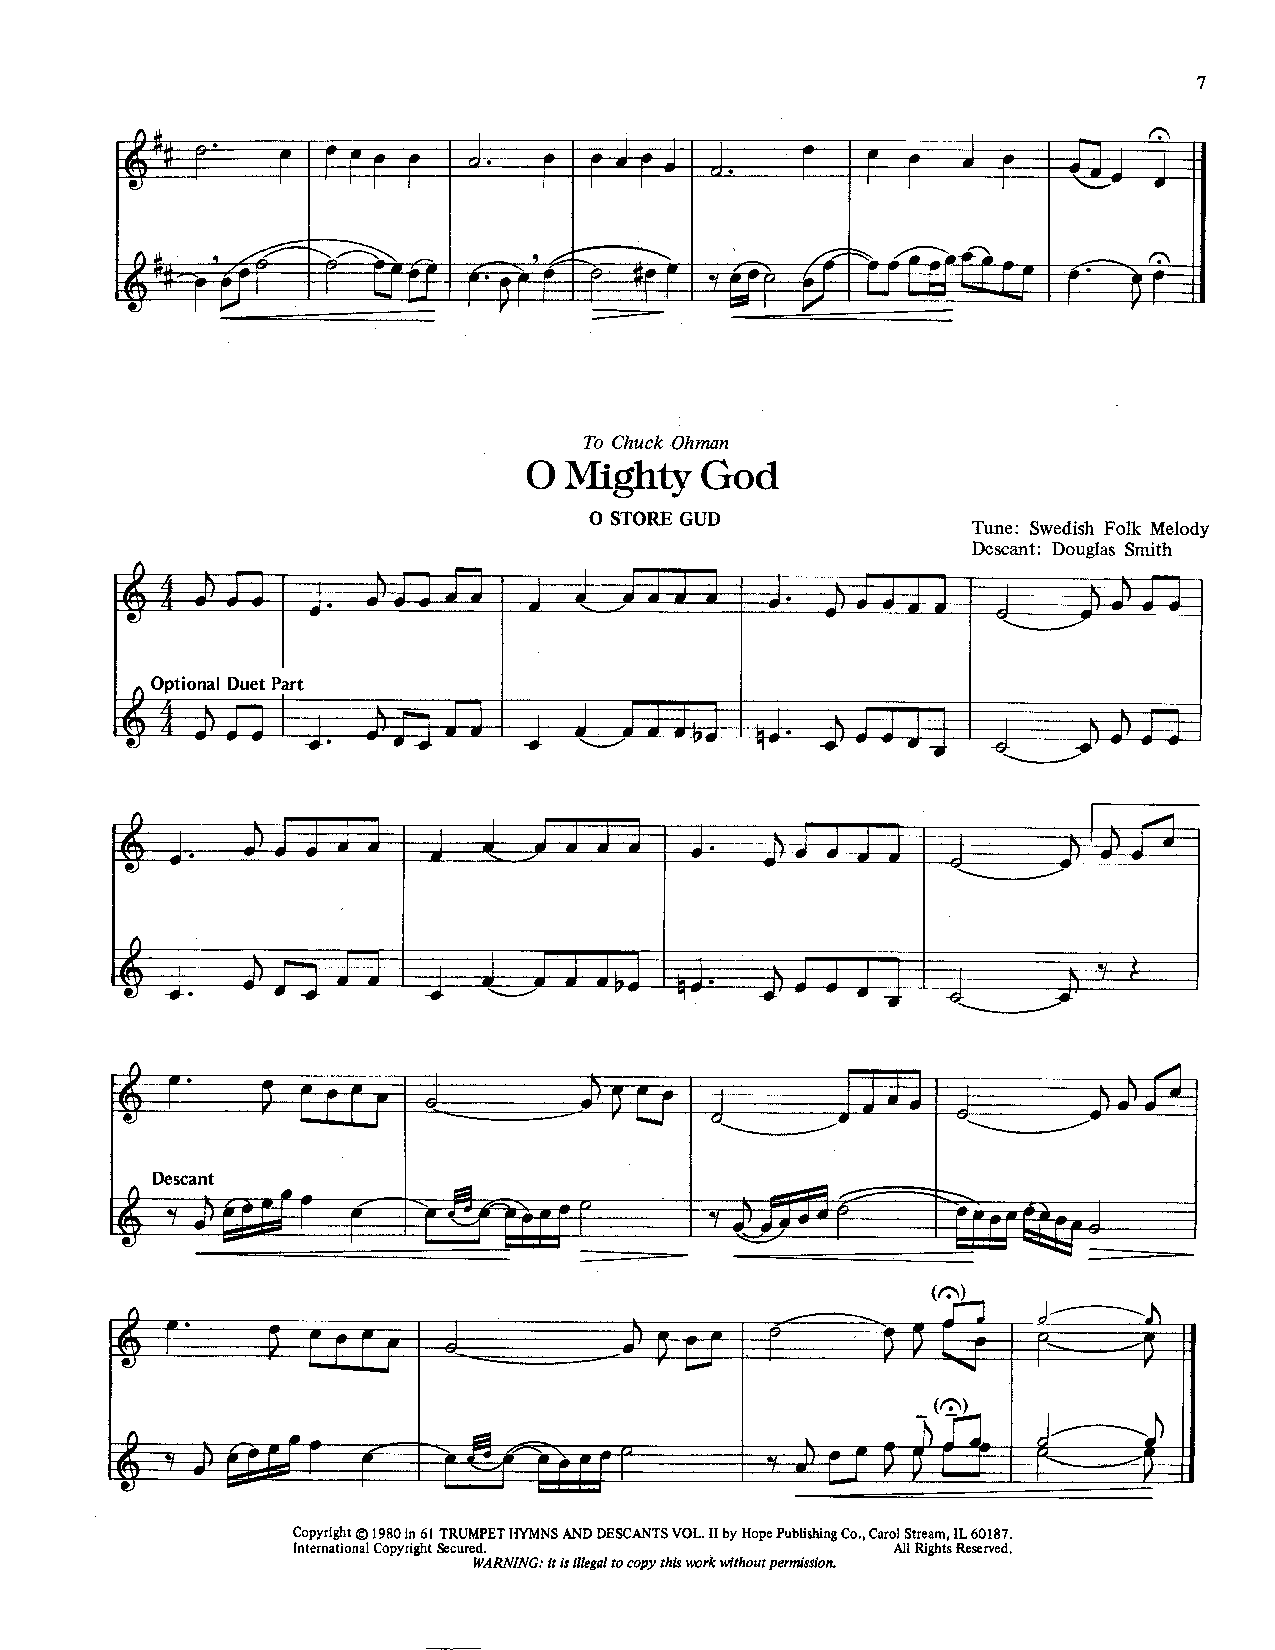 61 TRUMPET HYMNS AND DESCANTS #2